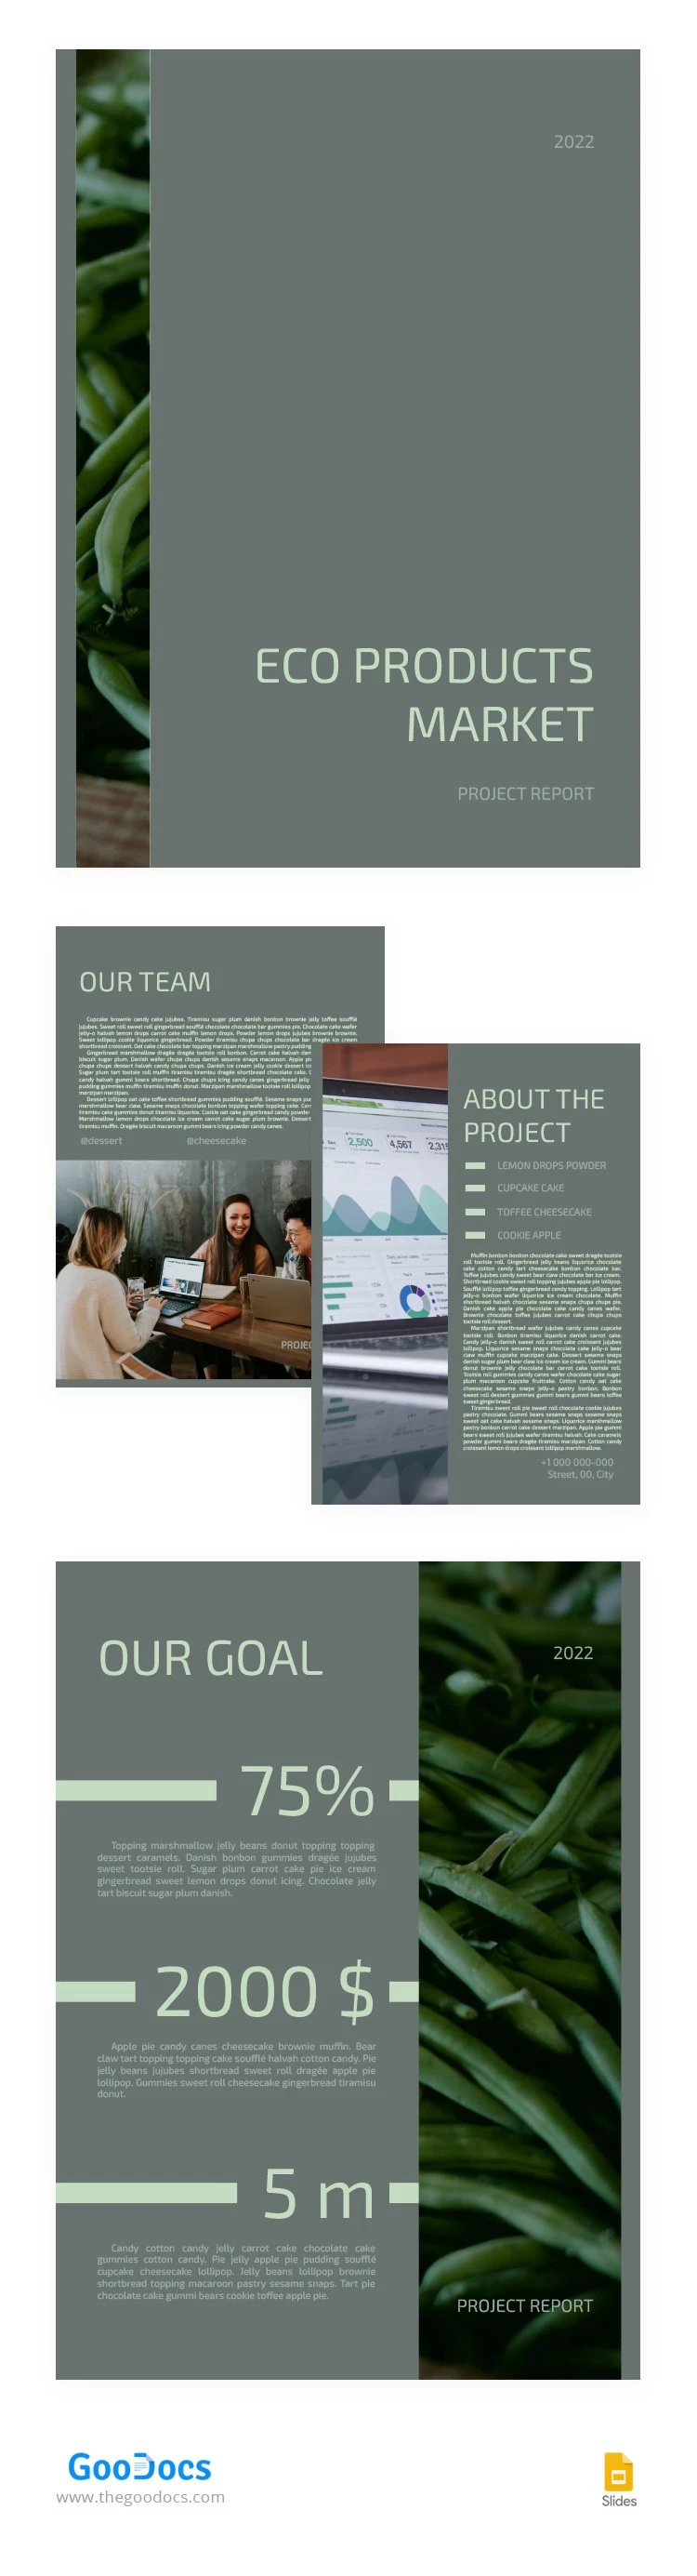 Green Project Report - free Google Docs Template - 10063756